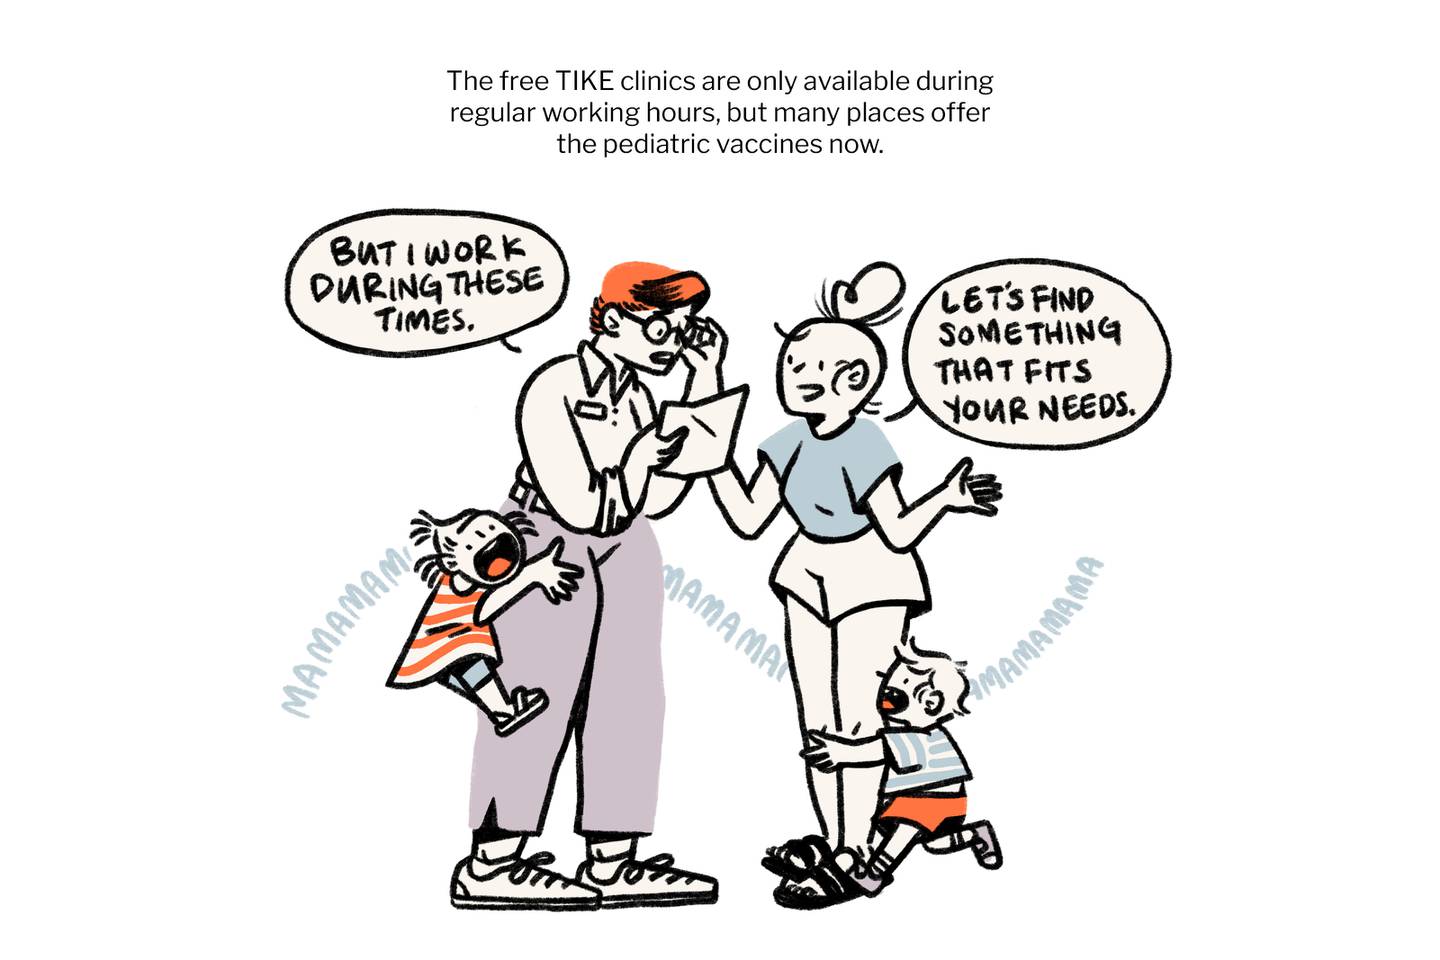 Free TIKE clinics are only available during regular working hours, but there are other options.